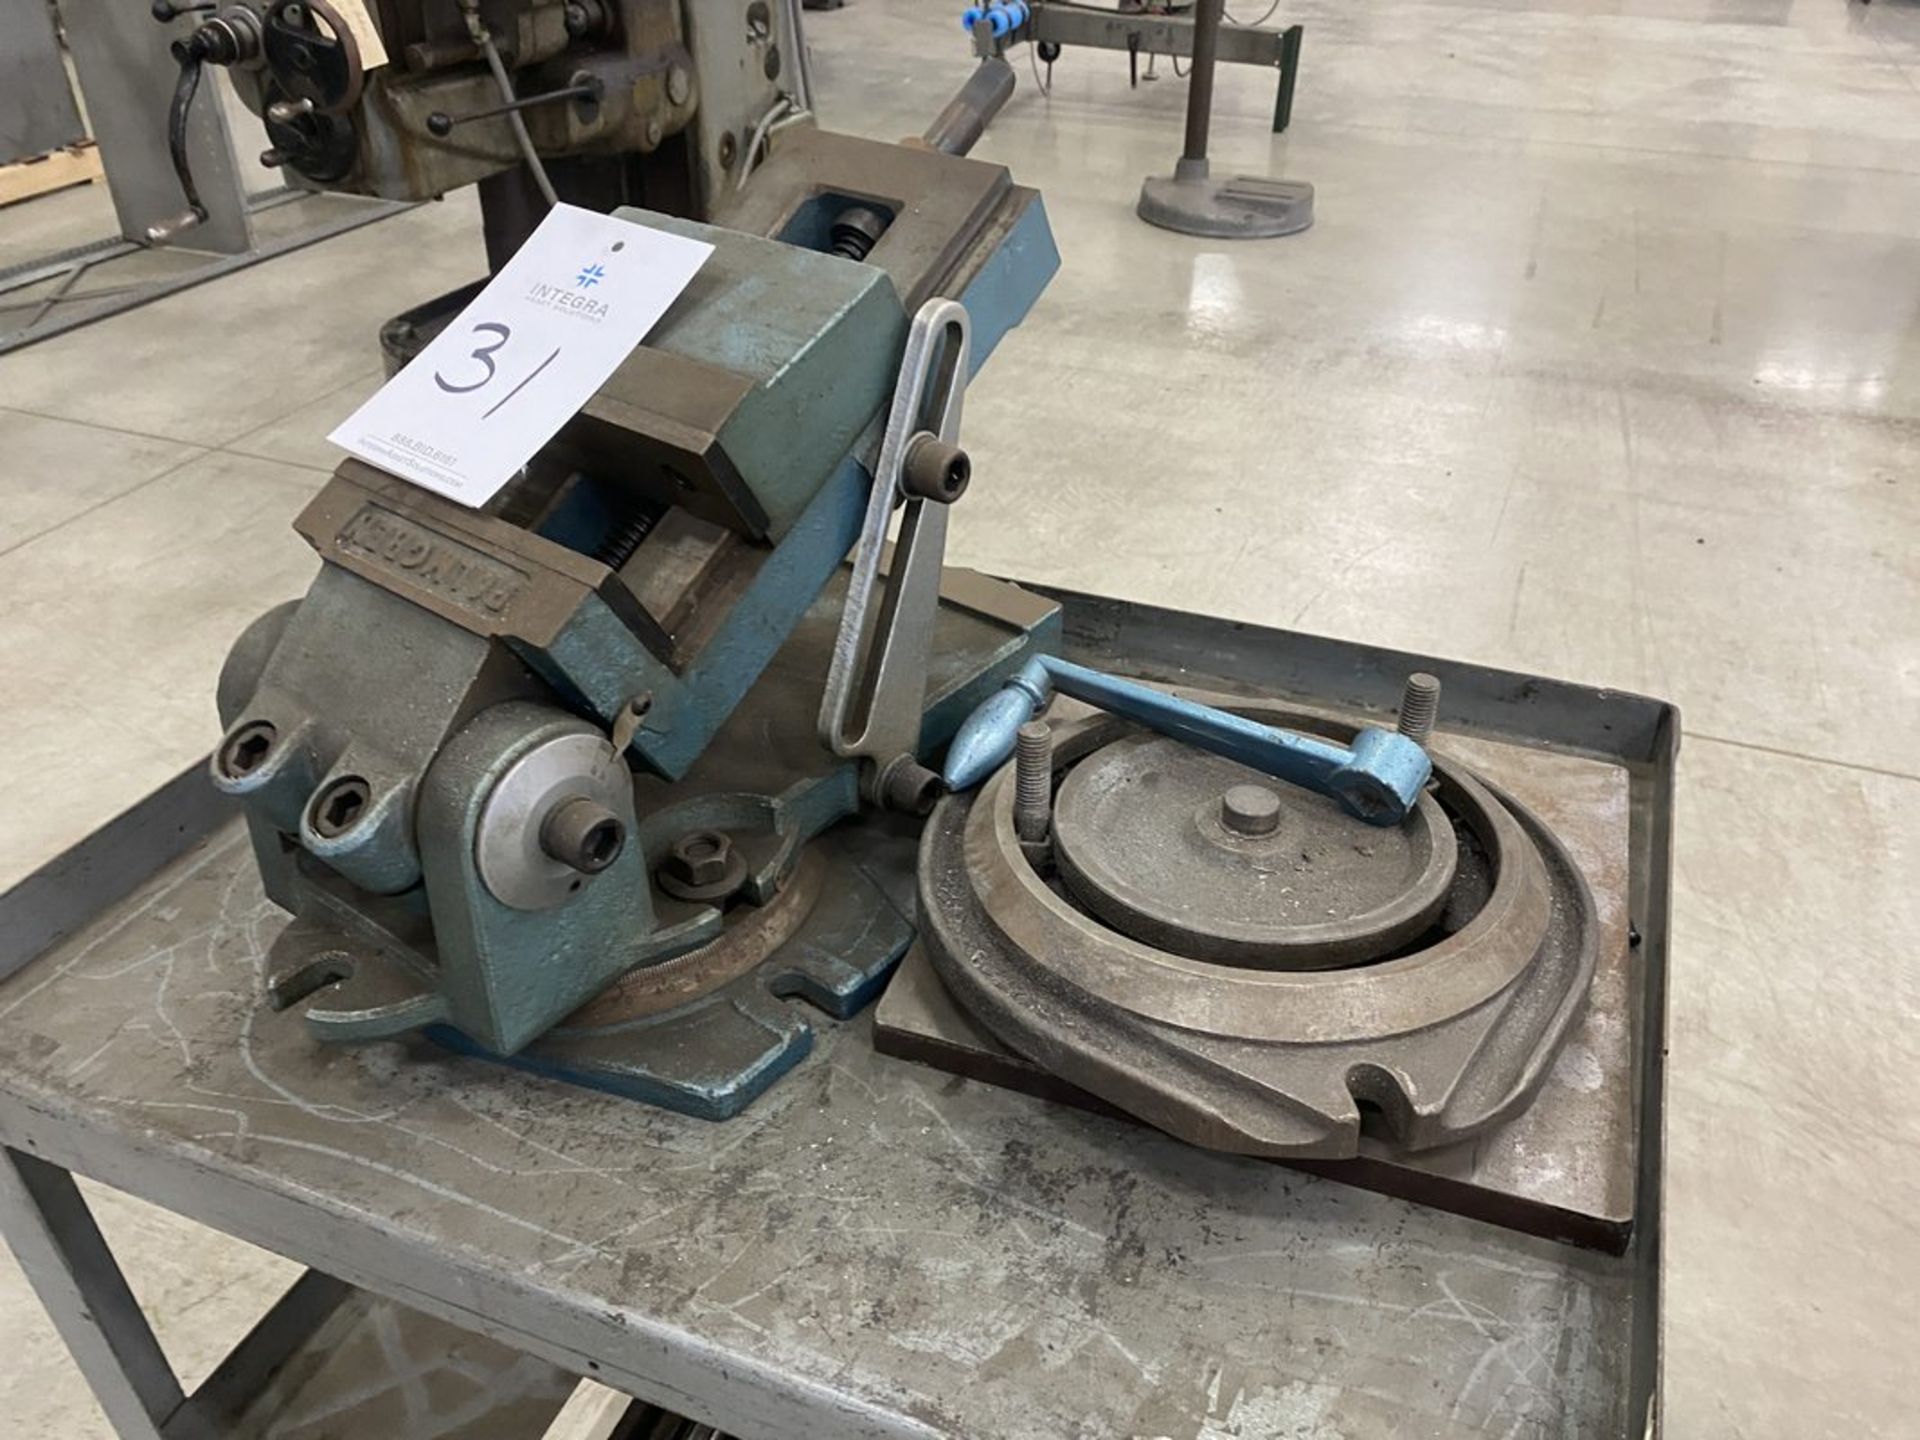 Palmgren 6" Tilt & Swivel Vise with Cart and Contents - Image 2 of 3